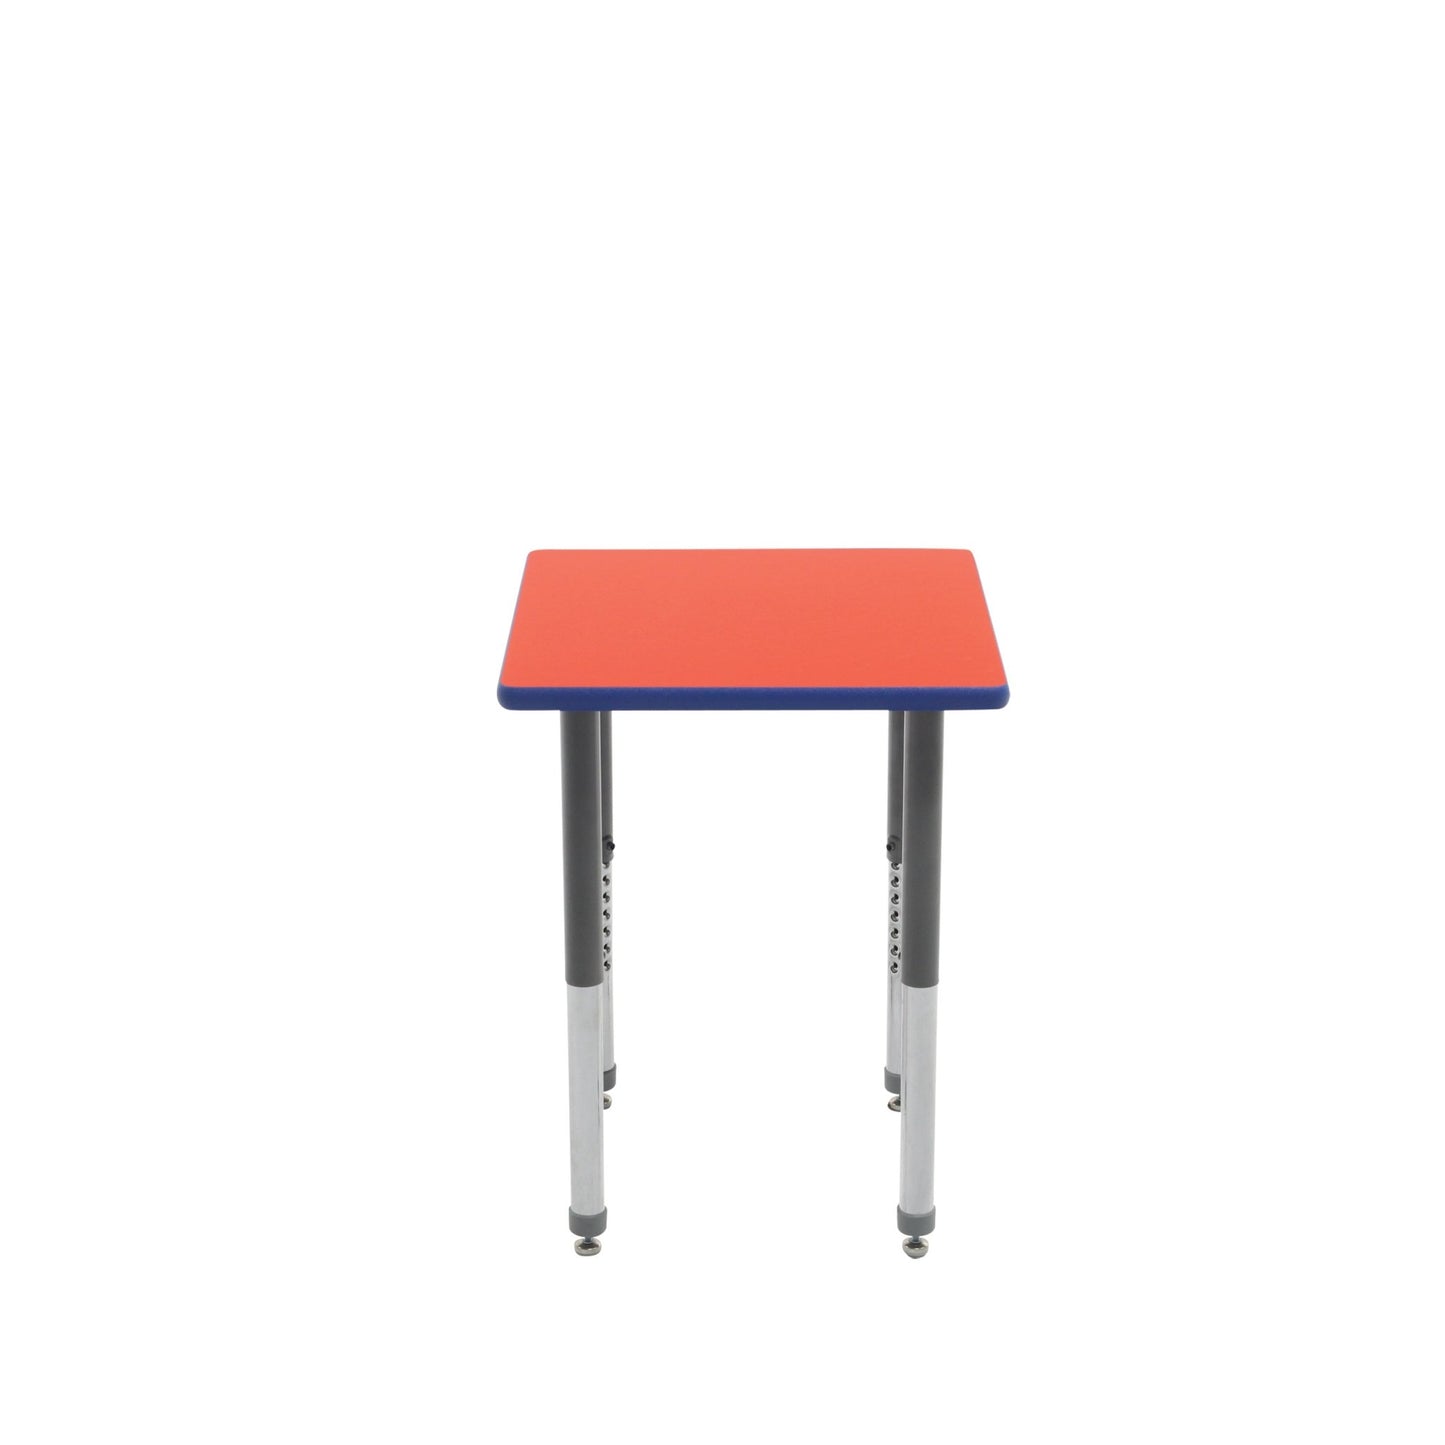 AmTab Whiteboard Table Markerboard Table Dry Erase Table - Activity Legs - Square - 24"W x 24"L (AmTab AMT-WASQ24D) - SchoolOutlet